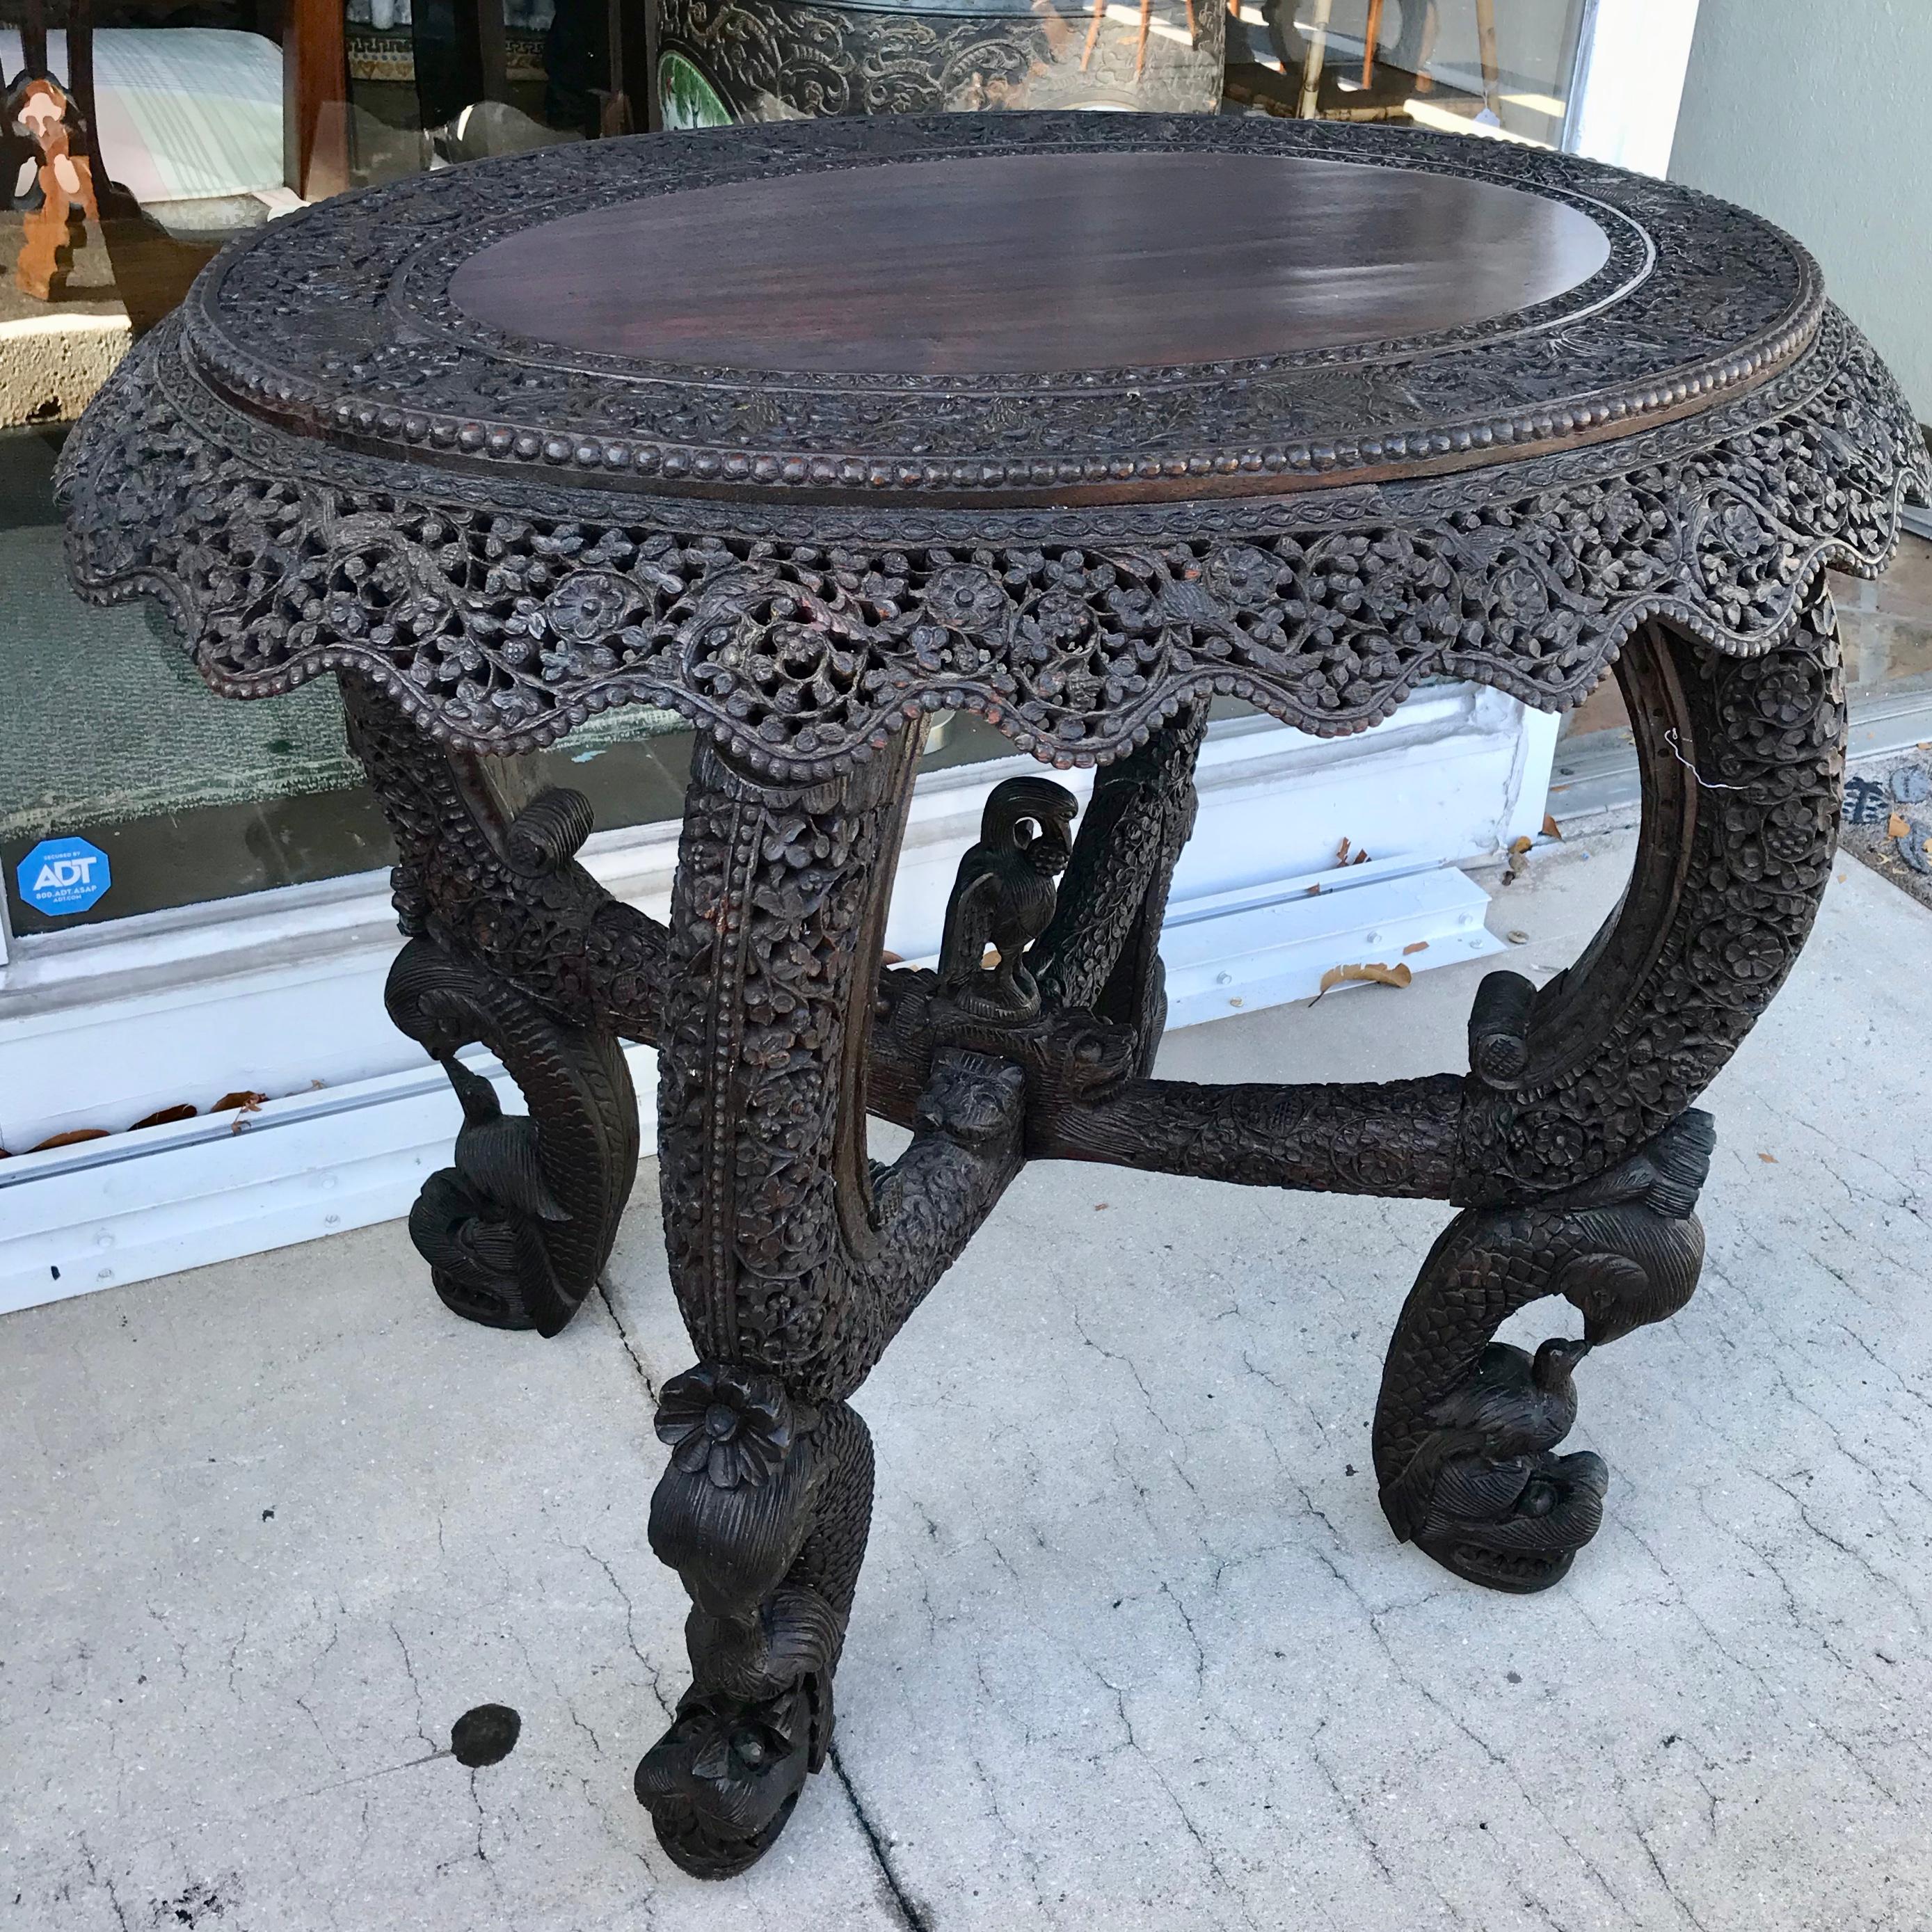 The table is profusely carved with depictions of animals and birds.
Exquisite hand wood carving with beautiful scale and patina.